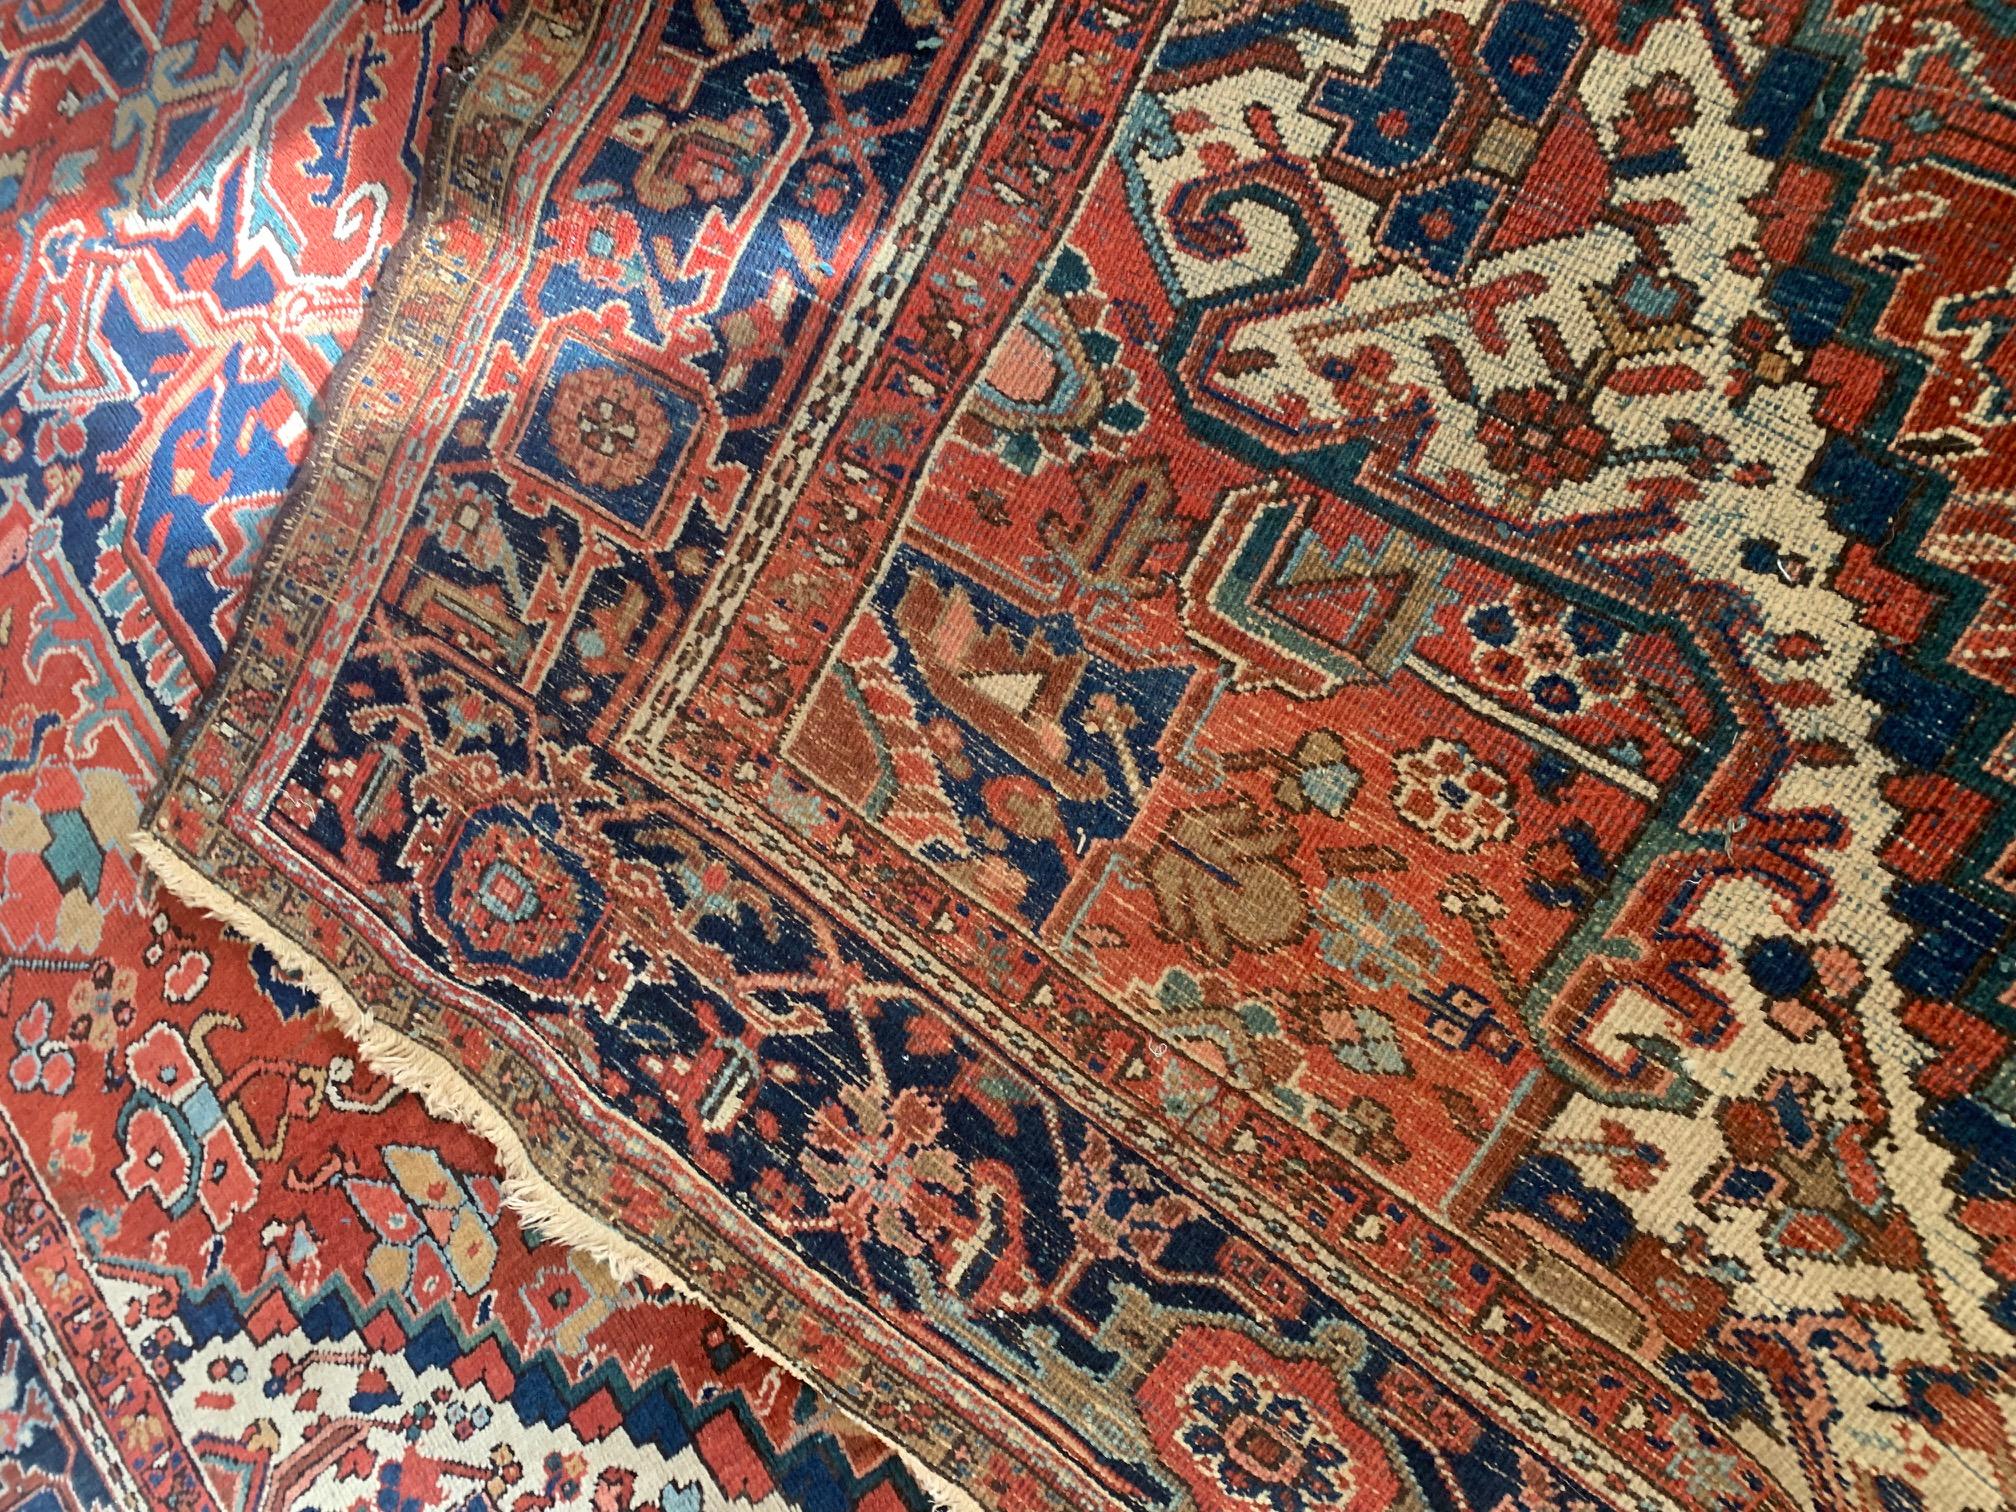 Early 20th Century Handmade Antique Persian Style Heriz Rug 9.4' x 12.5', 1900s - 2B031 For Sale